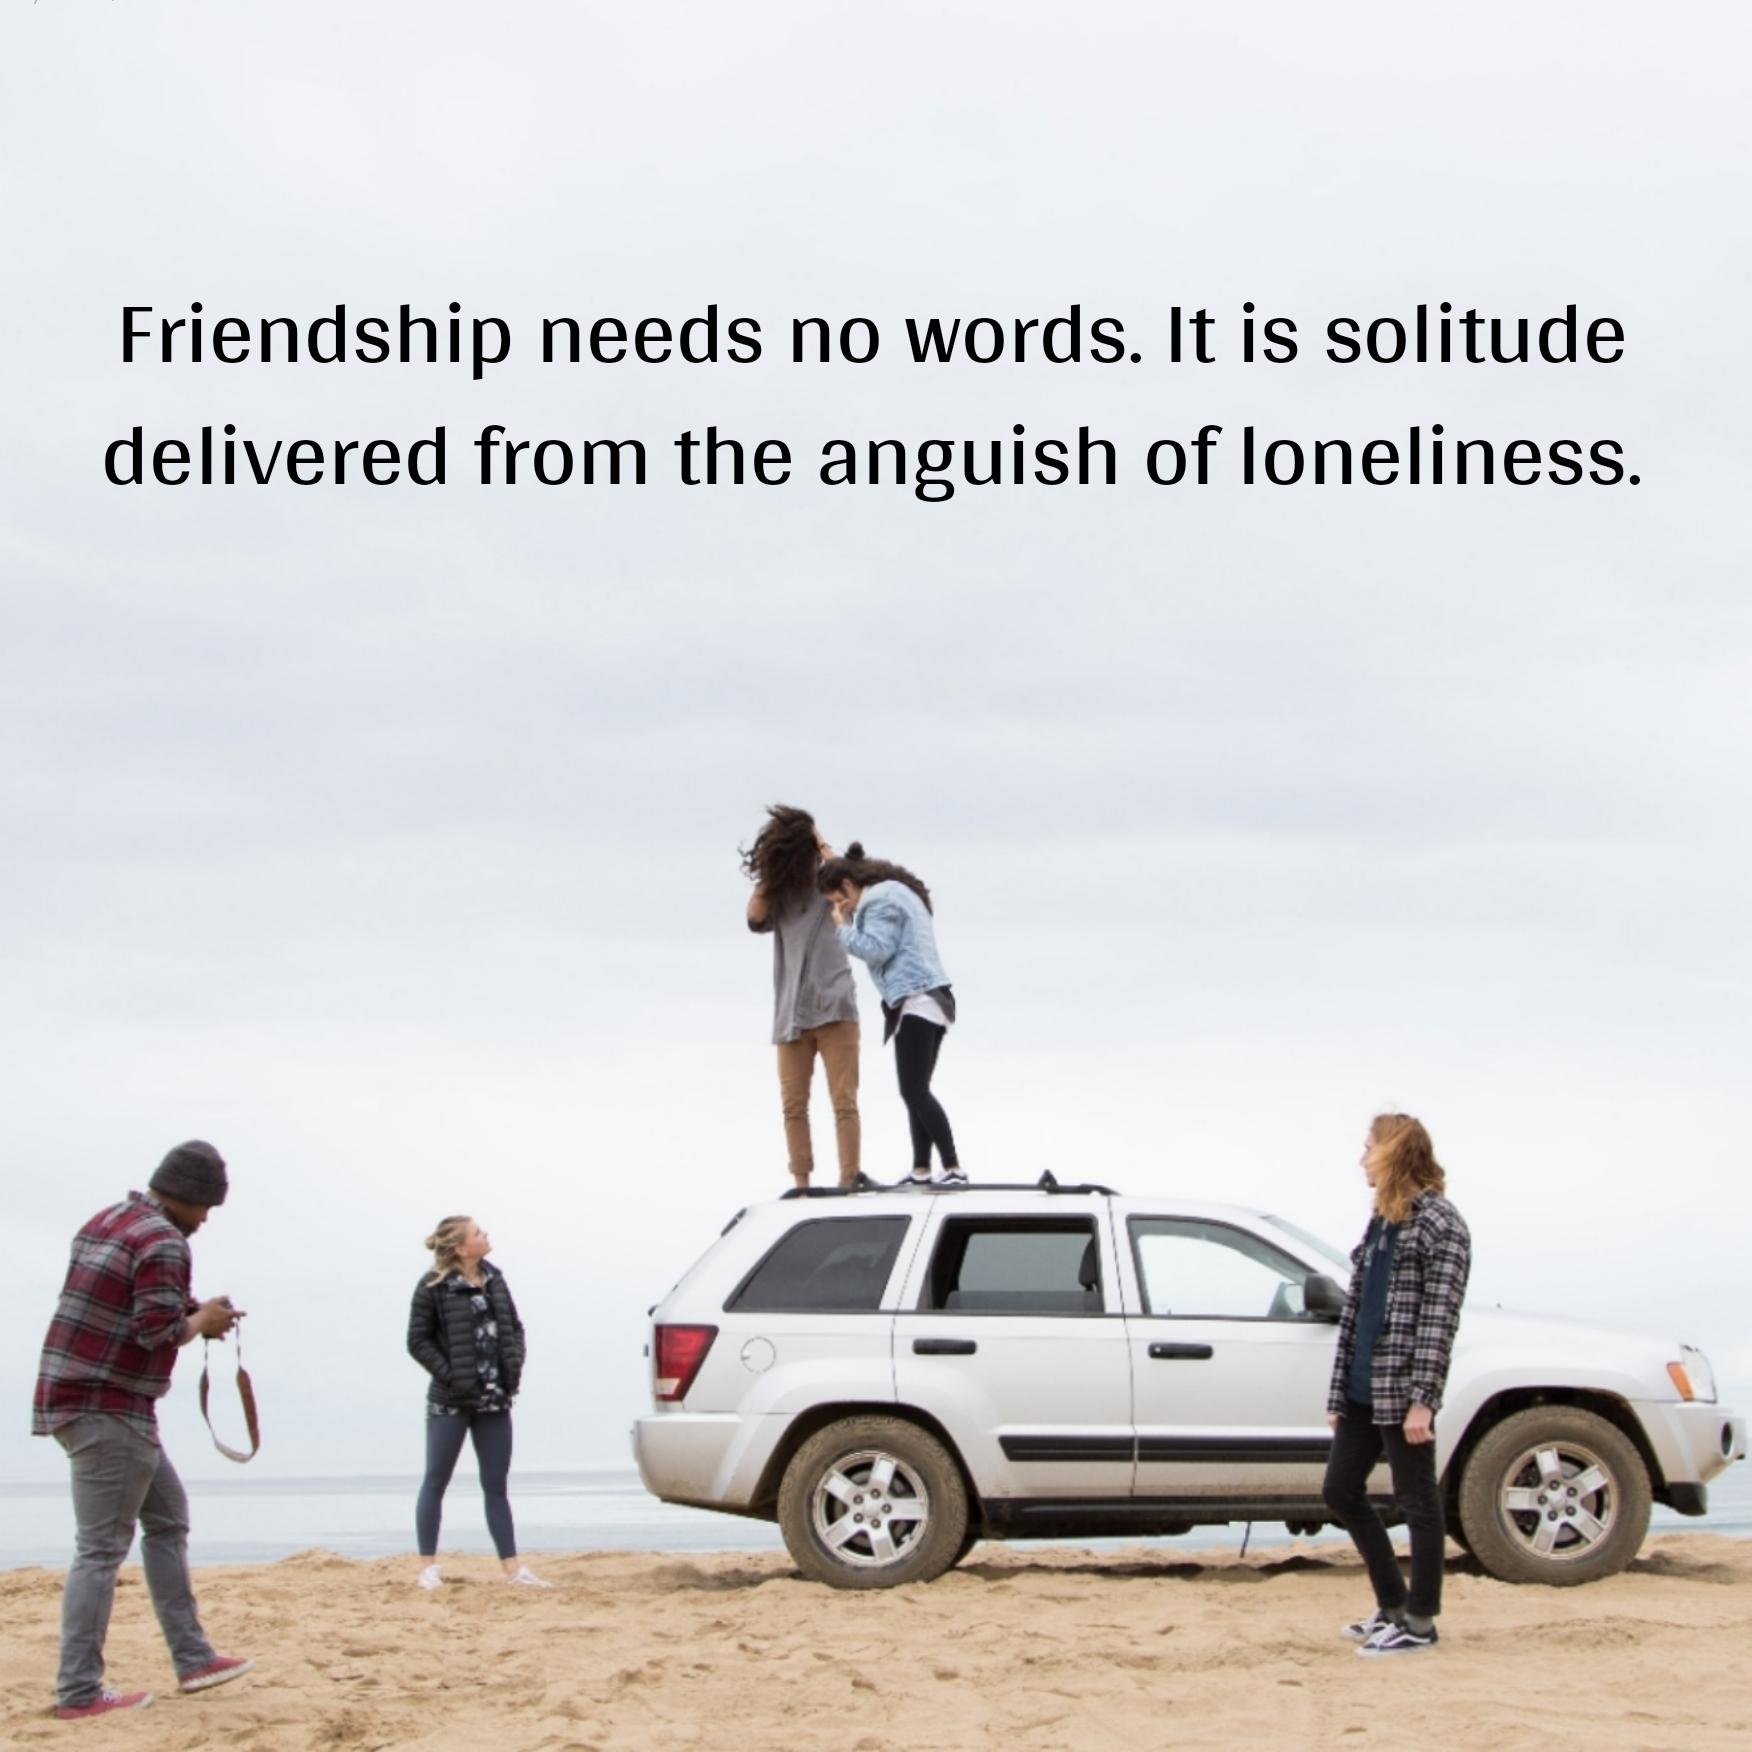 Friendship needs no words It is solitude delivered from the anguish of loneliness